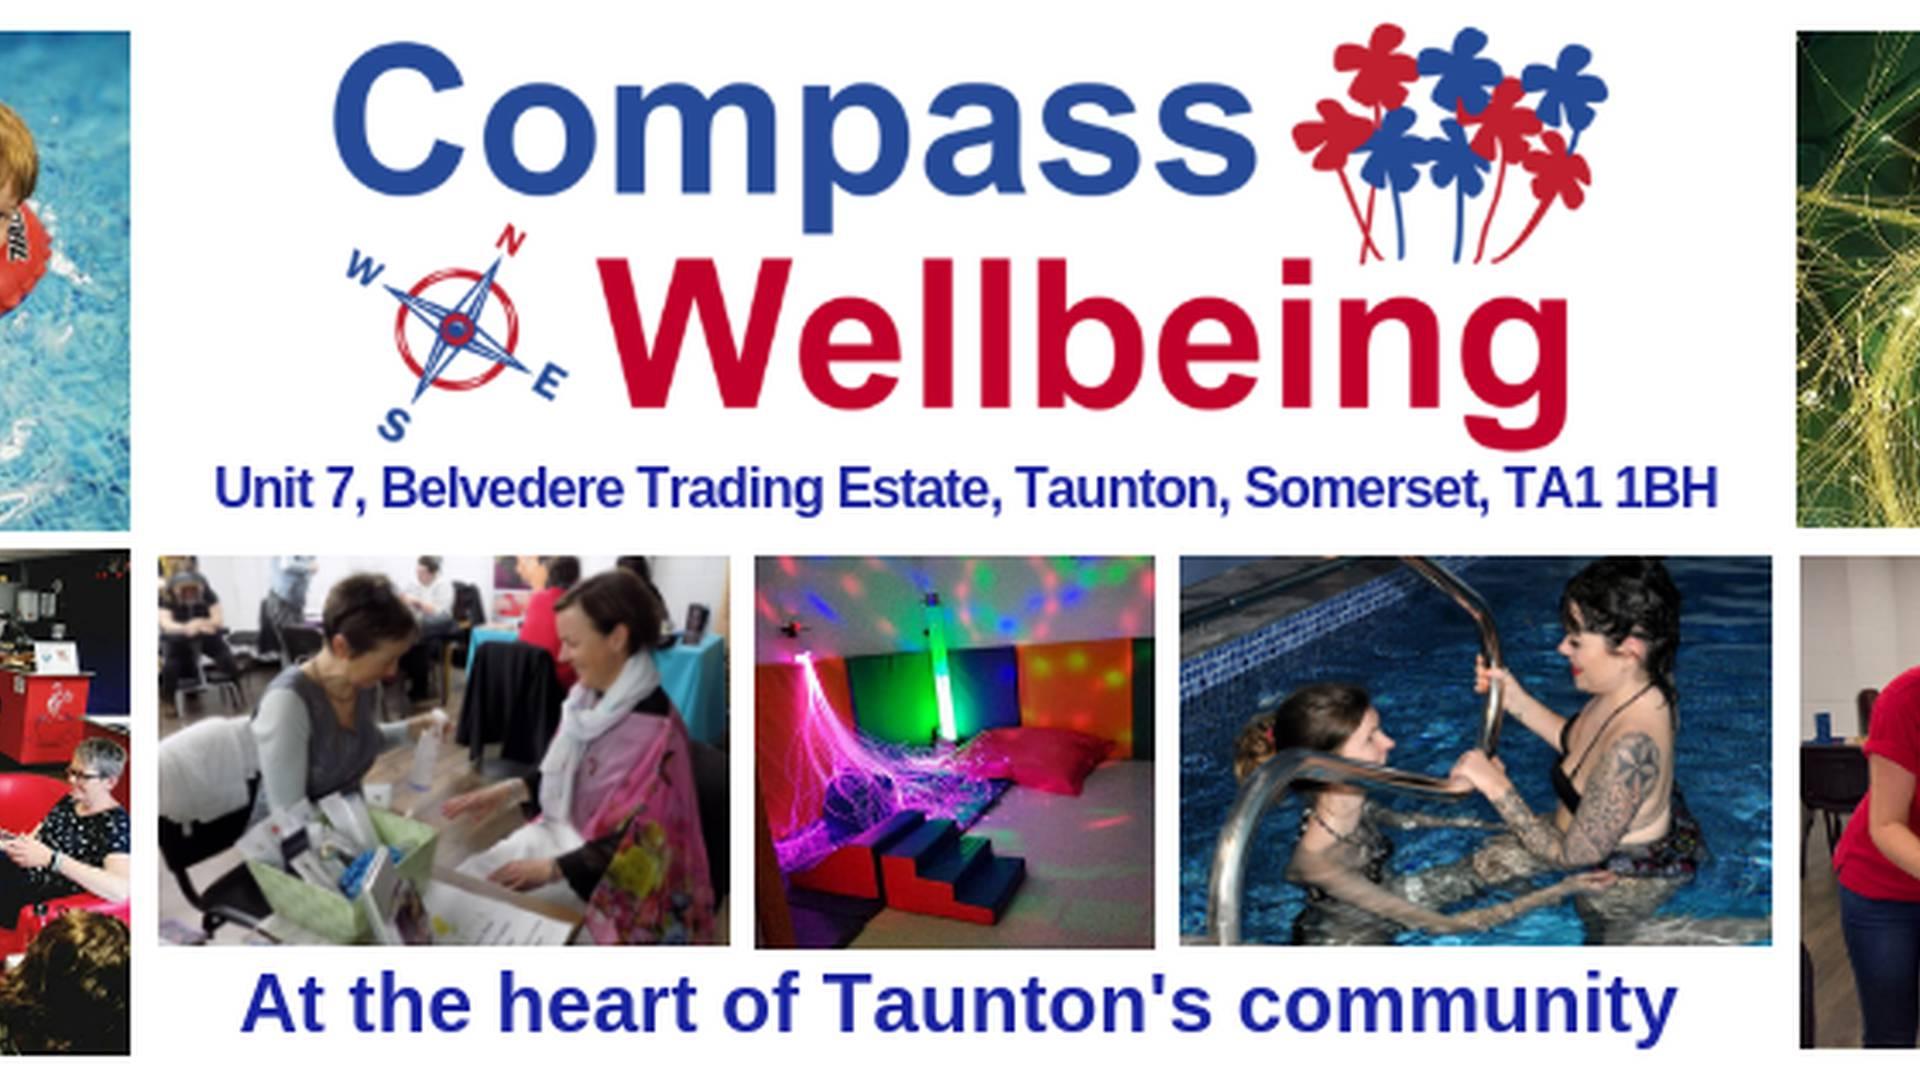 Compass Wellbeing photo